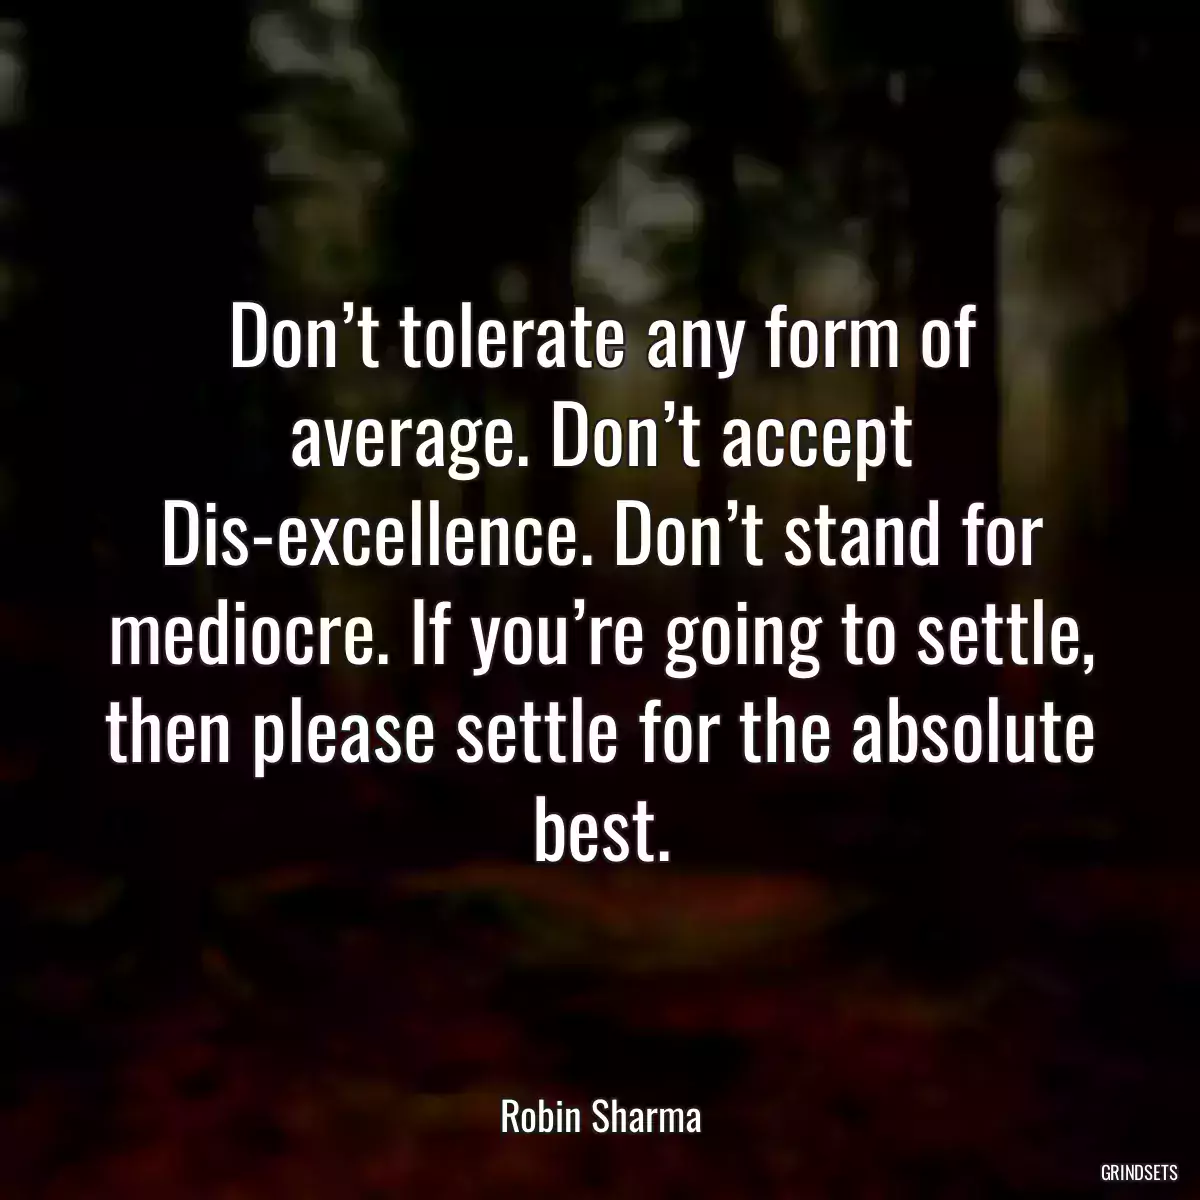 Don’t tolerate any form of average. Don’t accept Dis-excellence. Don’t stand for mediocre. If you’re going to settle, then please settle for the absolute best.